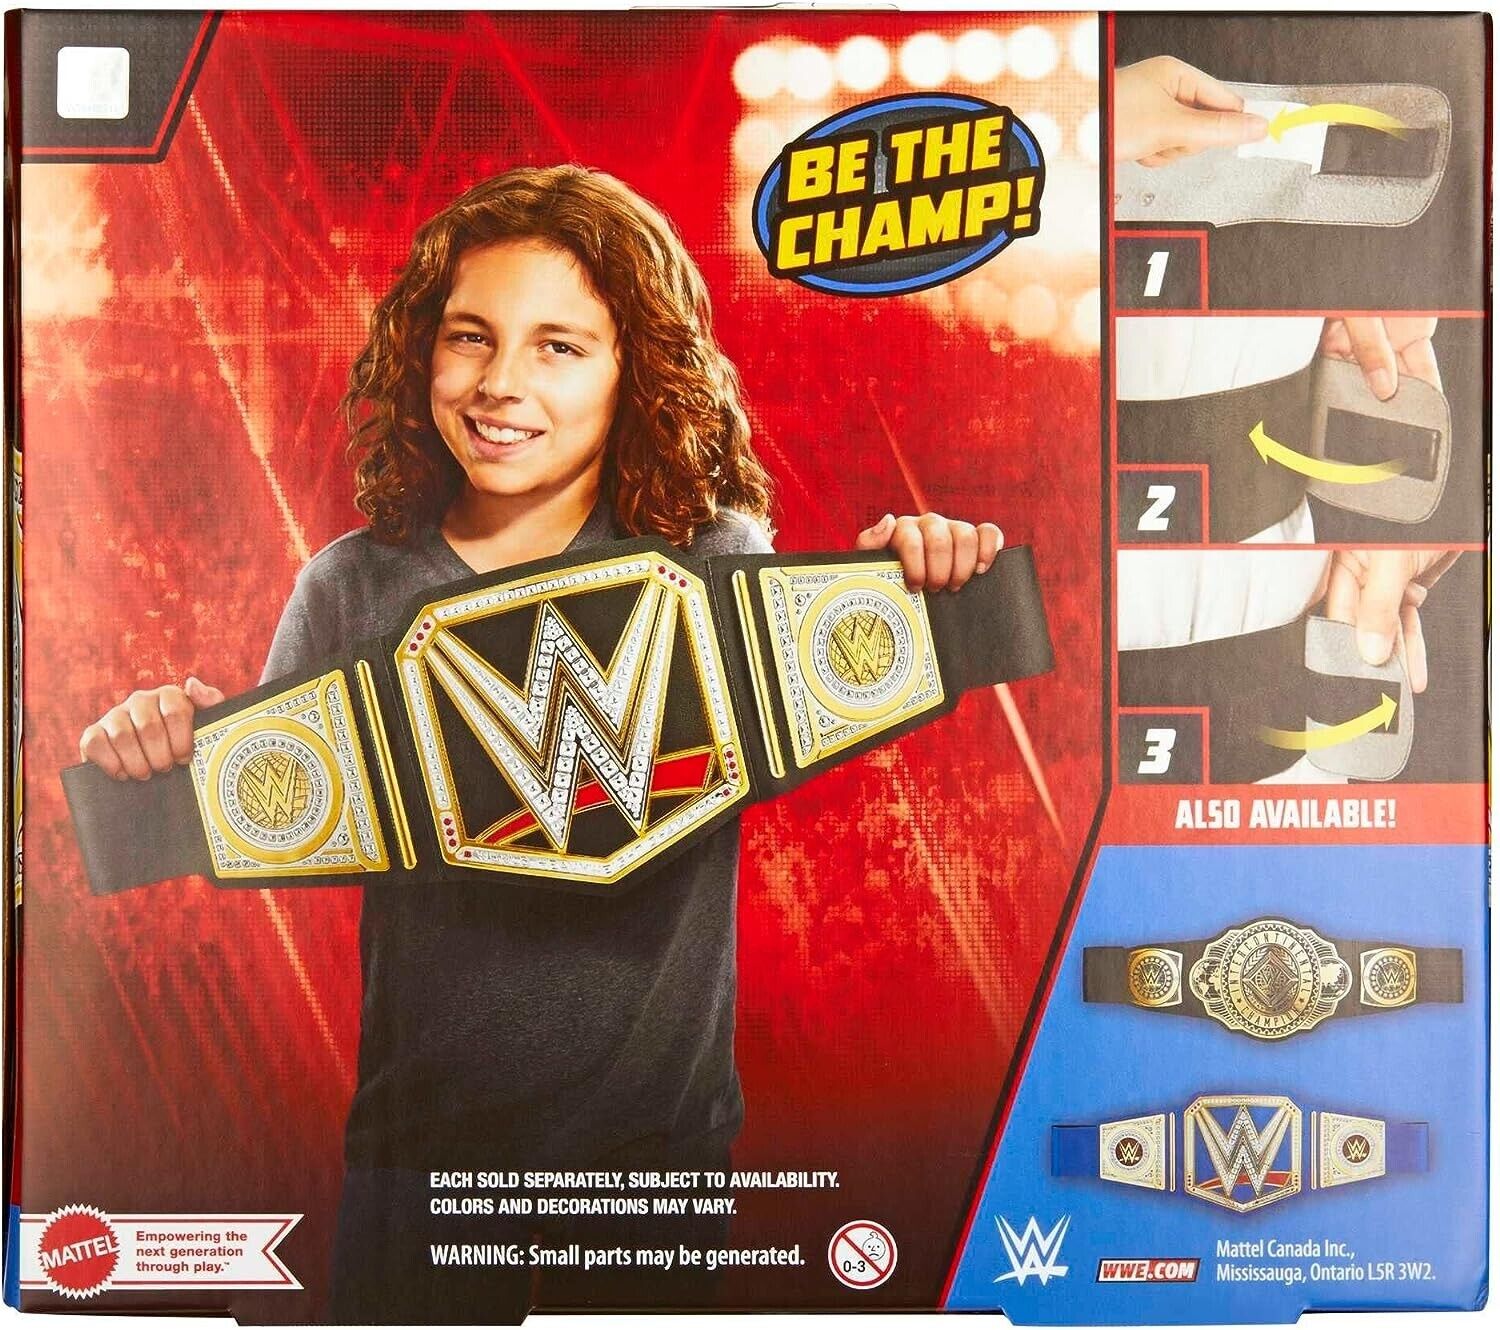 WWE Championship Role Play Kids Title Belt, Authentic Styling with Adjustable